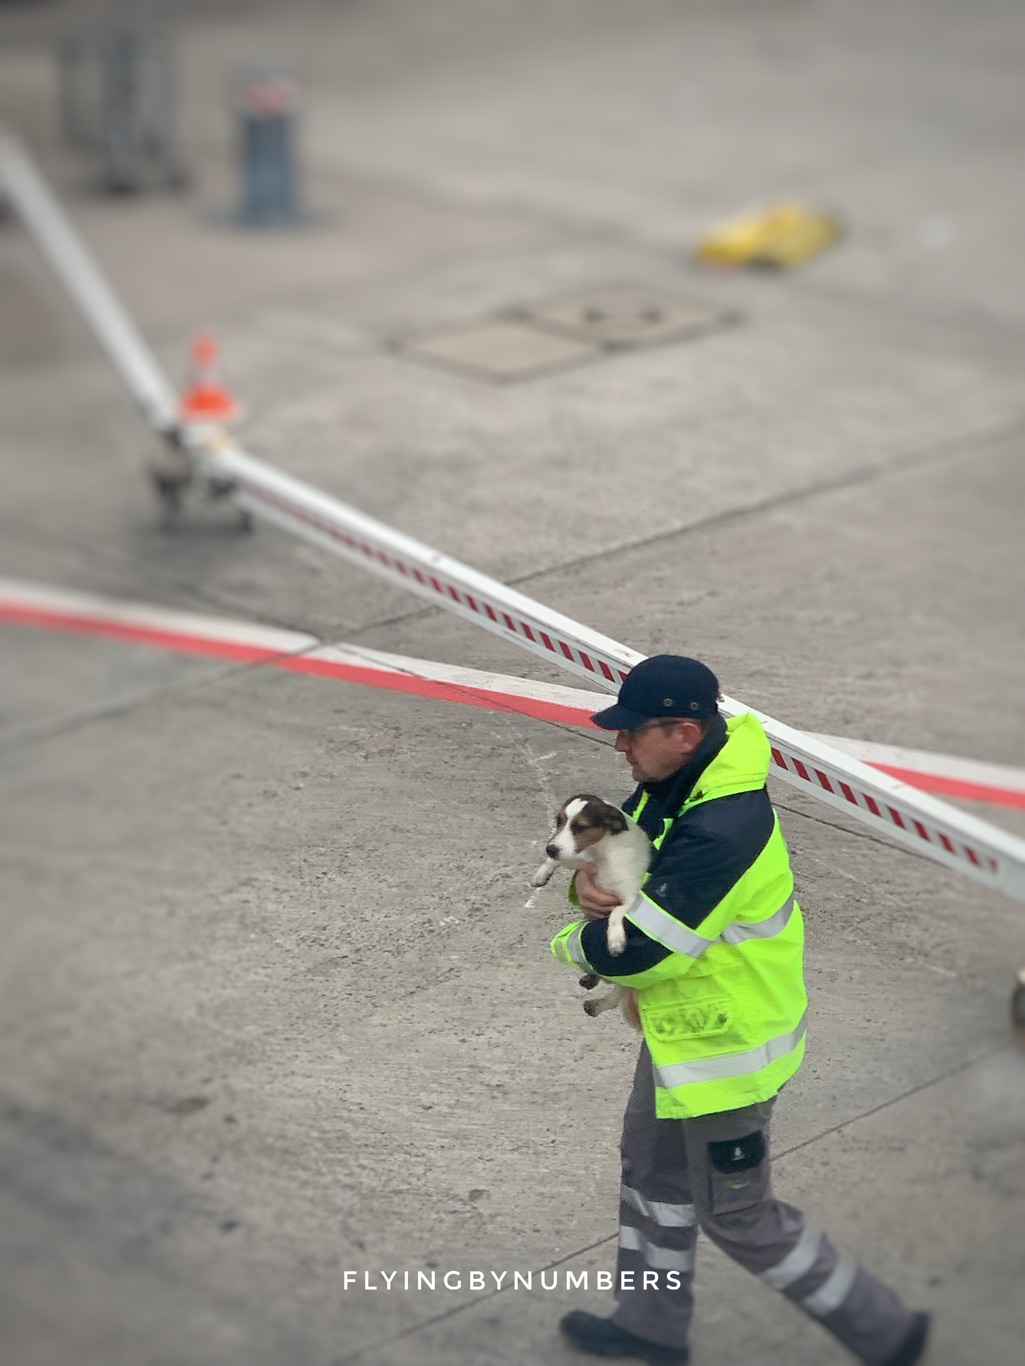 Airport staff catch runaway dog on the apron